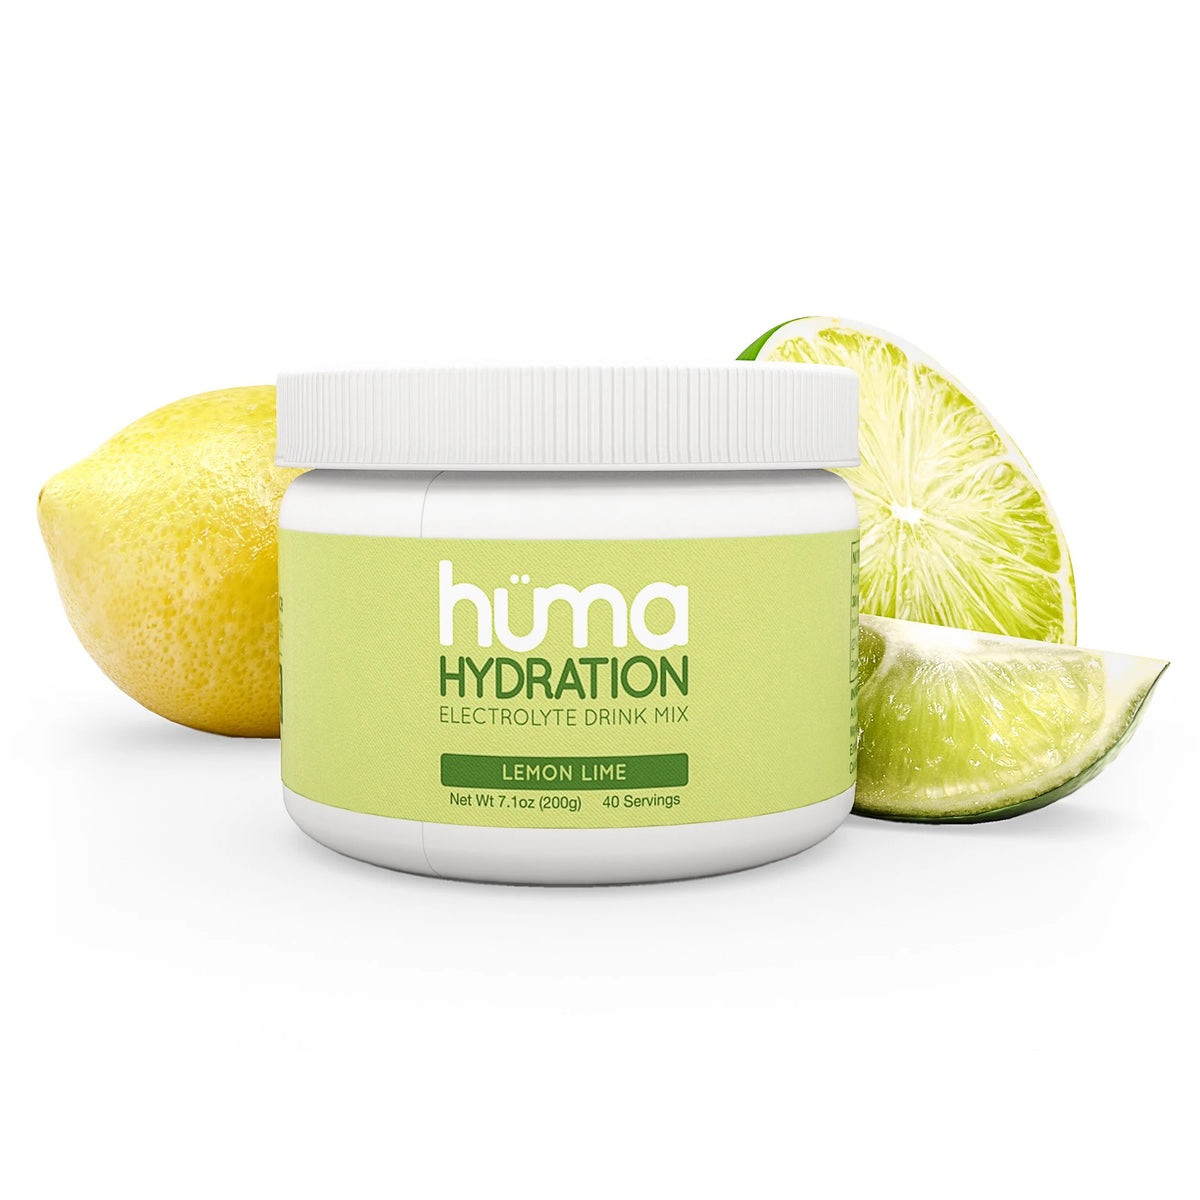 Huma Gel - Hydration Drink Mix in lemon lime flavour